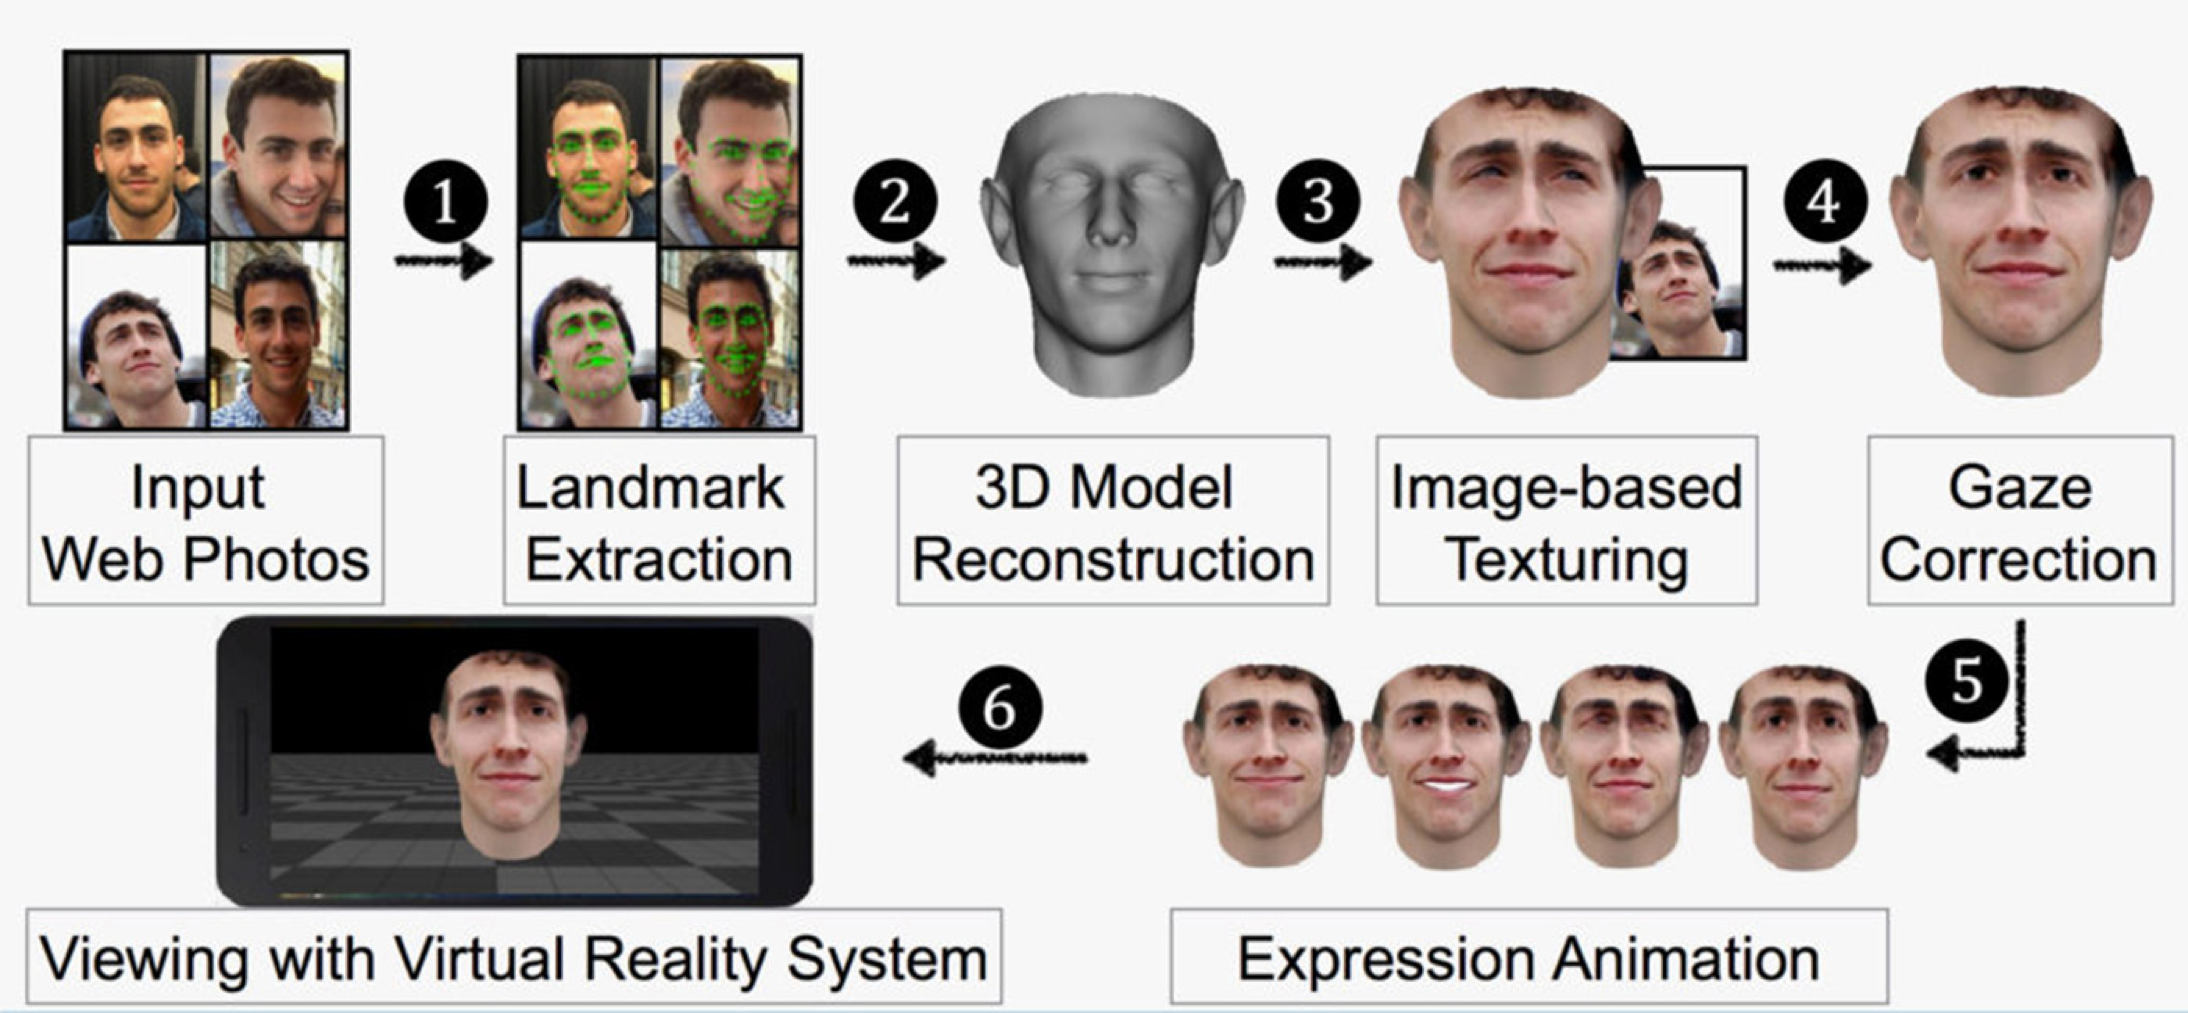 3D models based on Facebook images can fool facial recognition systems | Cyber Defense ...